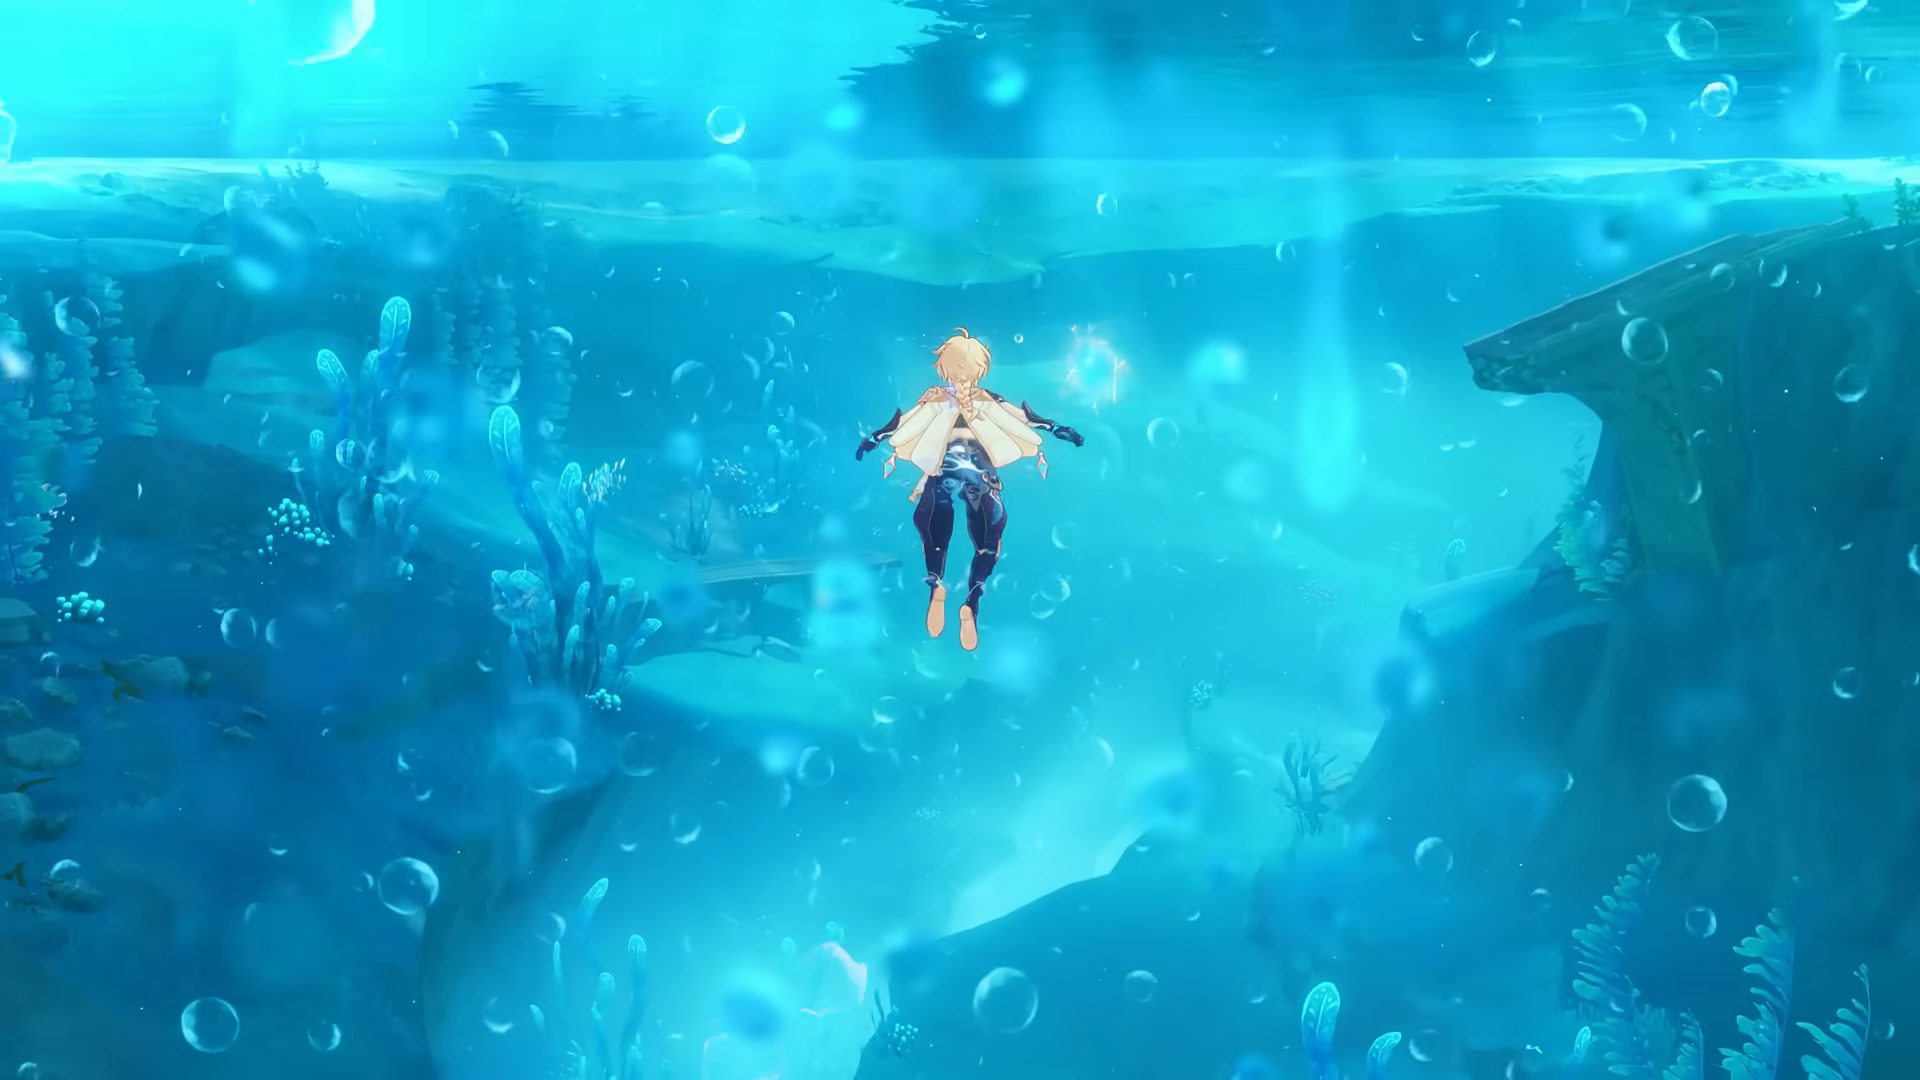 Mika diving into water in Genshin Impact